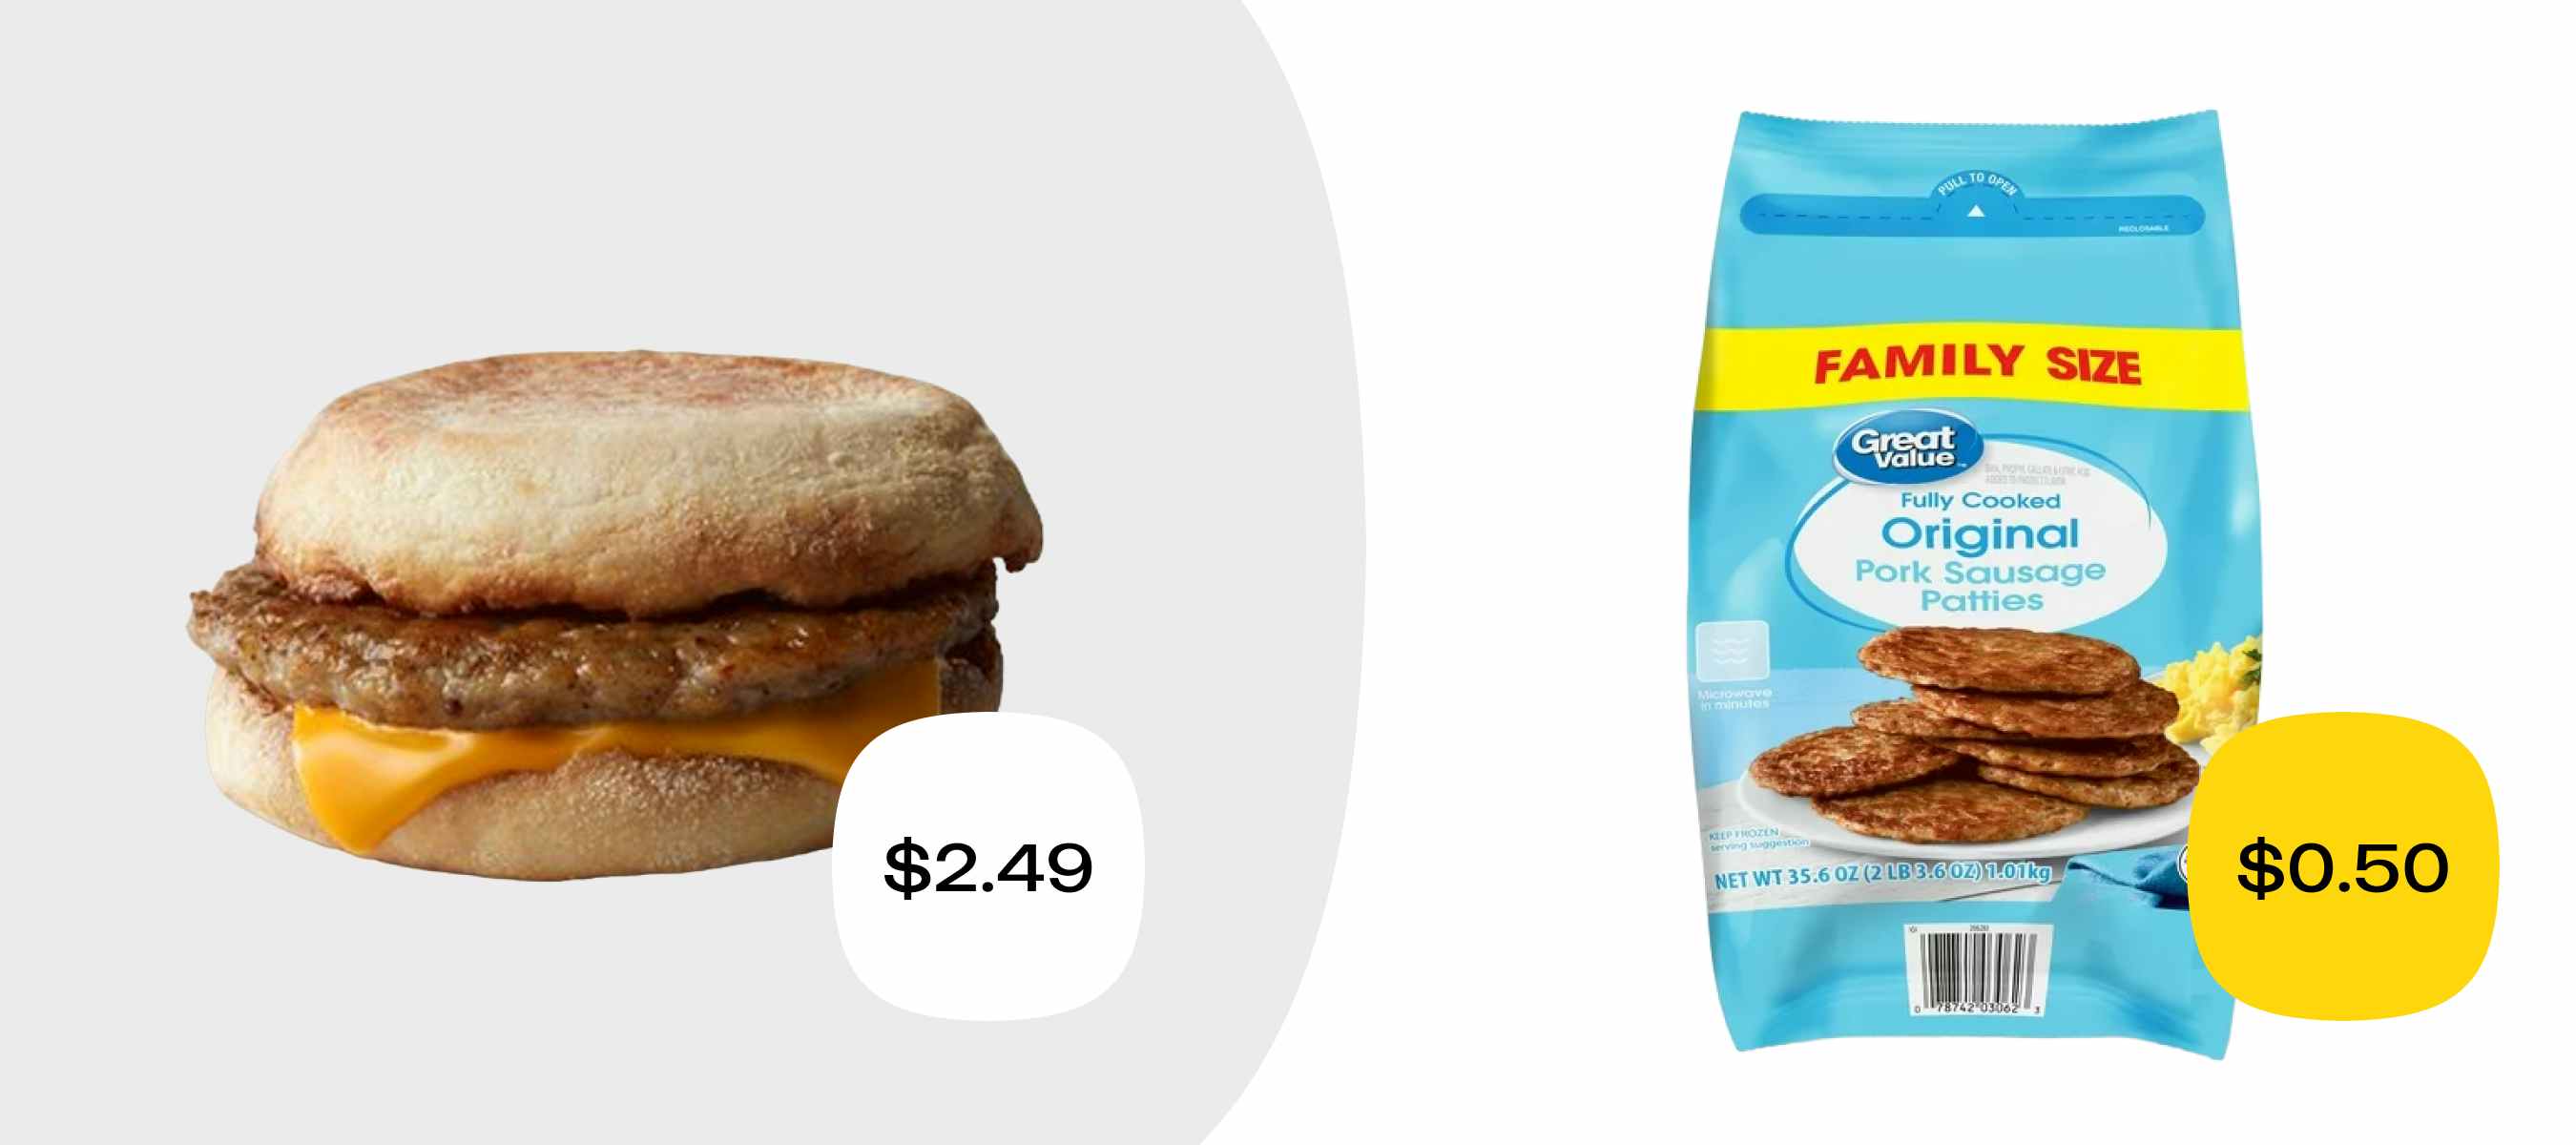 a mcdonalds sausage breakfast sandwich for $2.49 versus a bag of sausage patties from walmart for $0.50 a patty